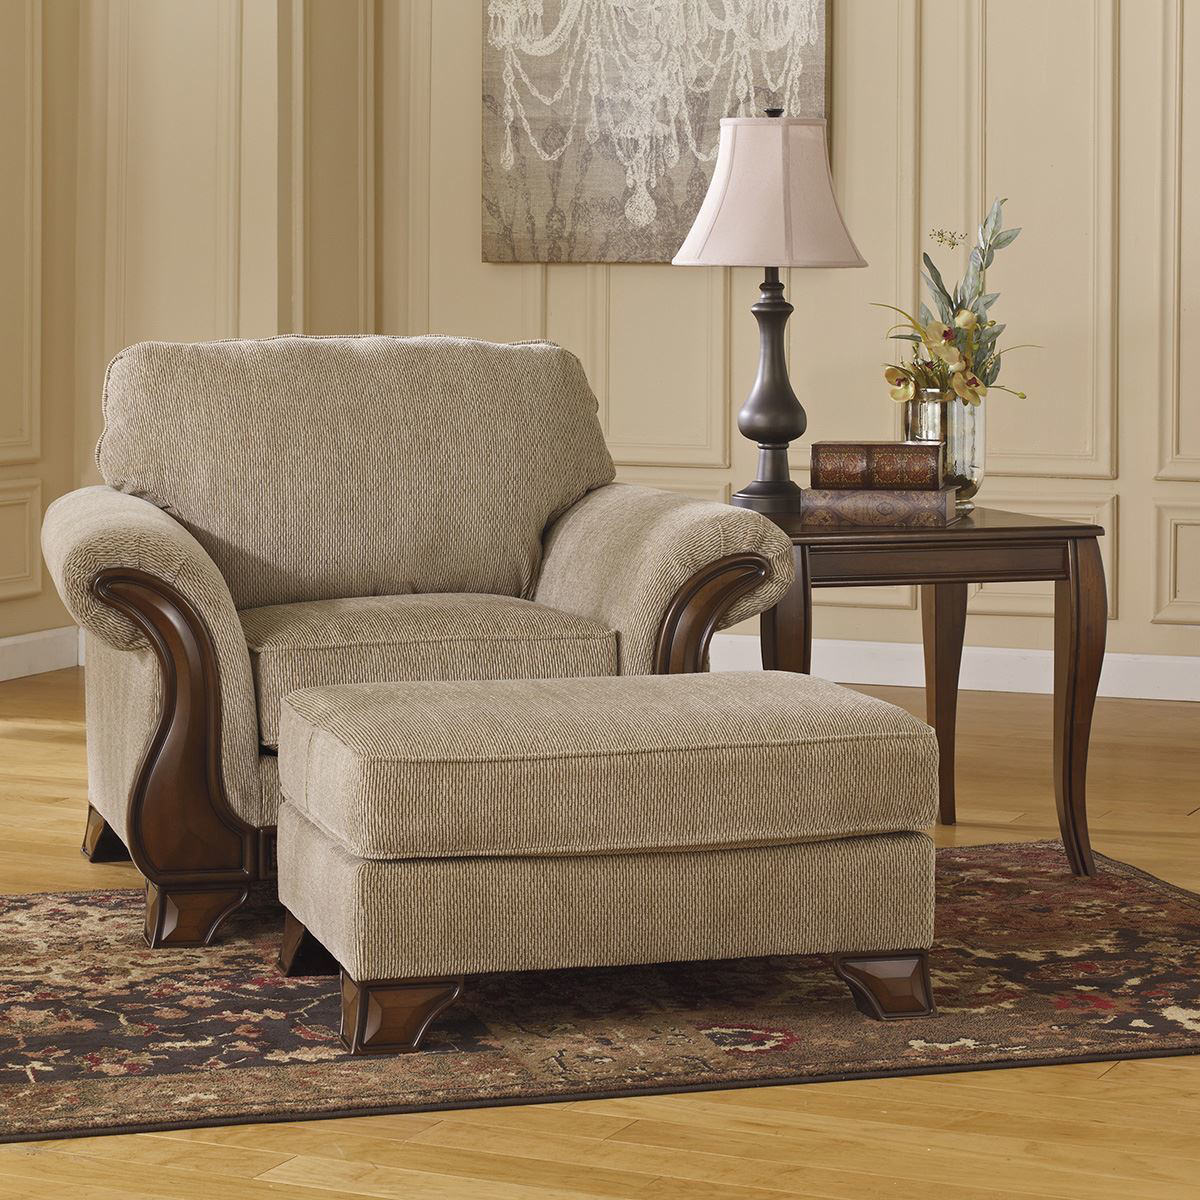 Thoroughbred chair with ottoman (sold separately)